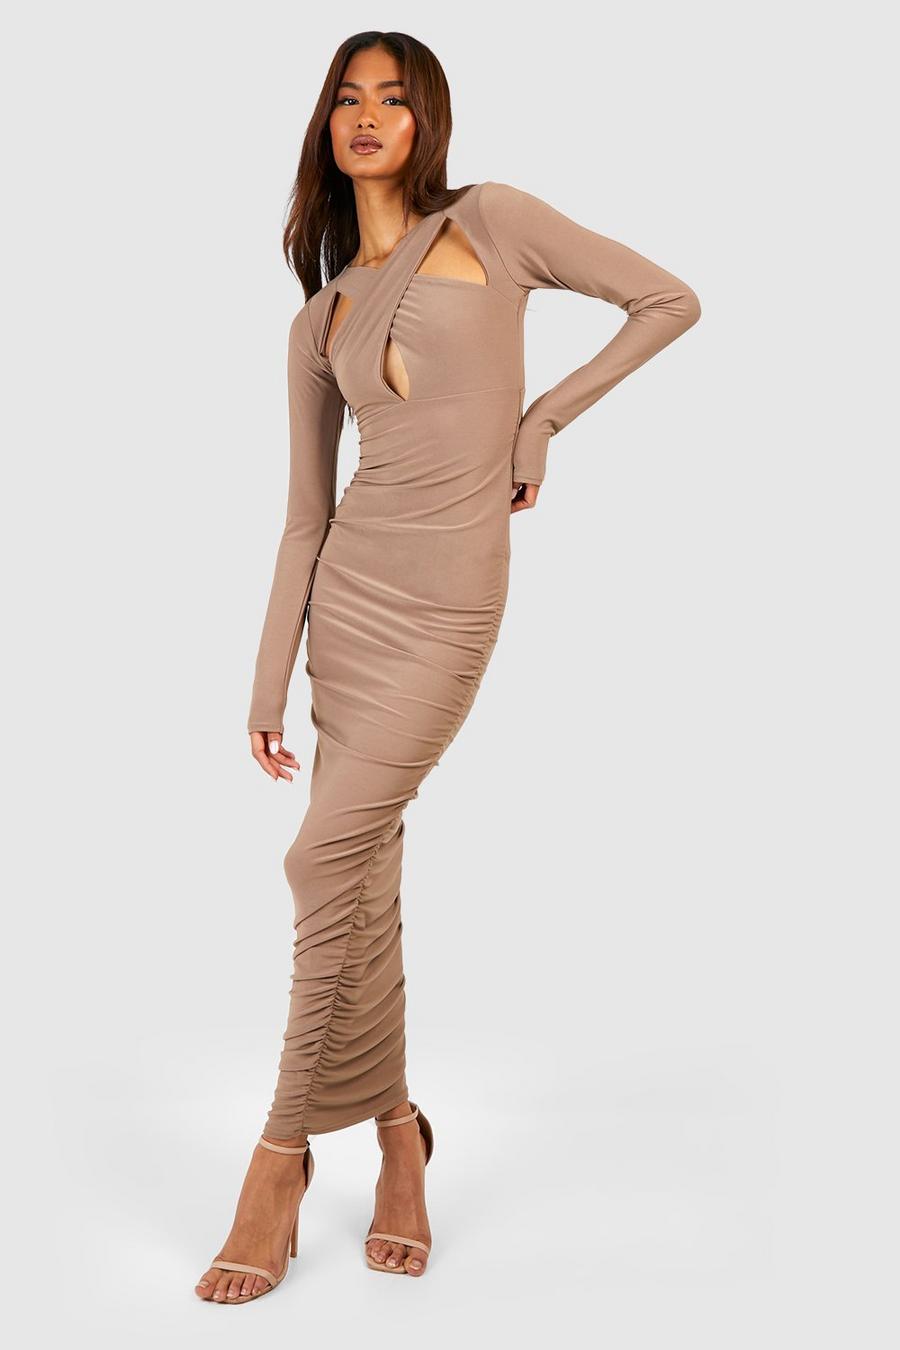 Mocha beige Tall Premium Soft Touch Keyhole Ruched Side Midaxi Dress